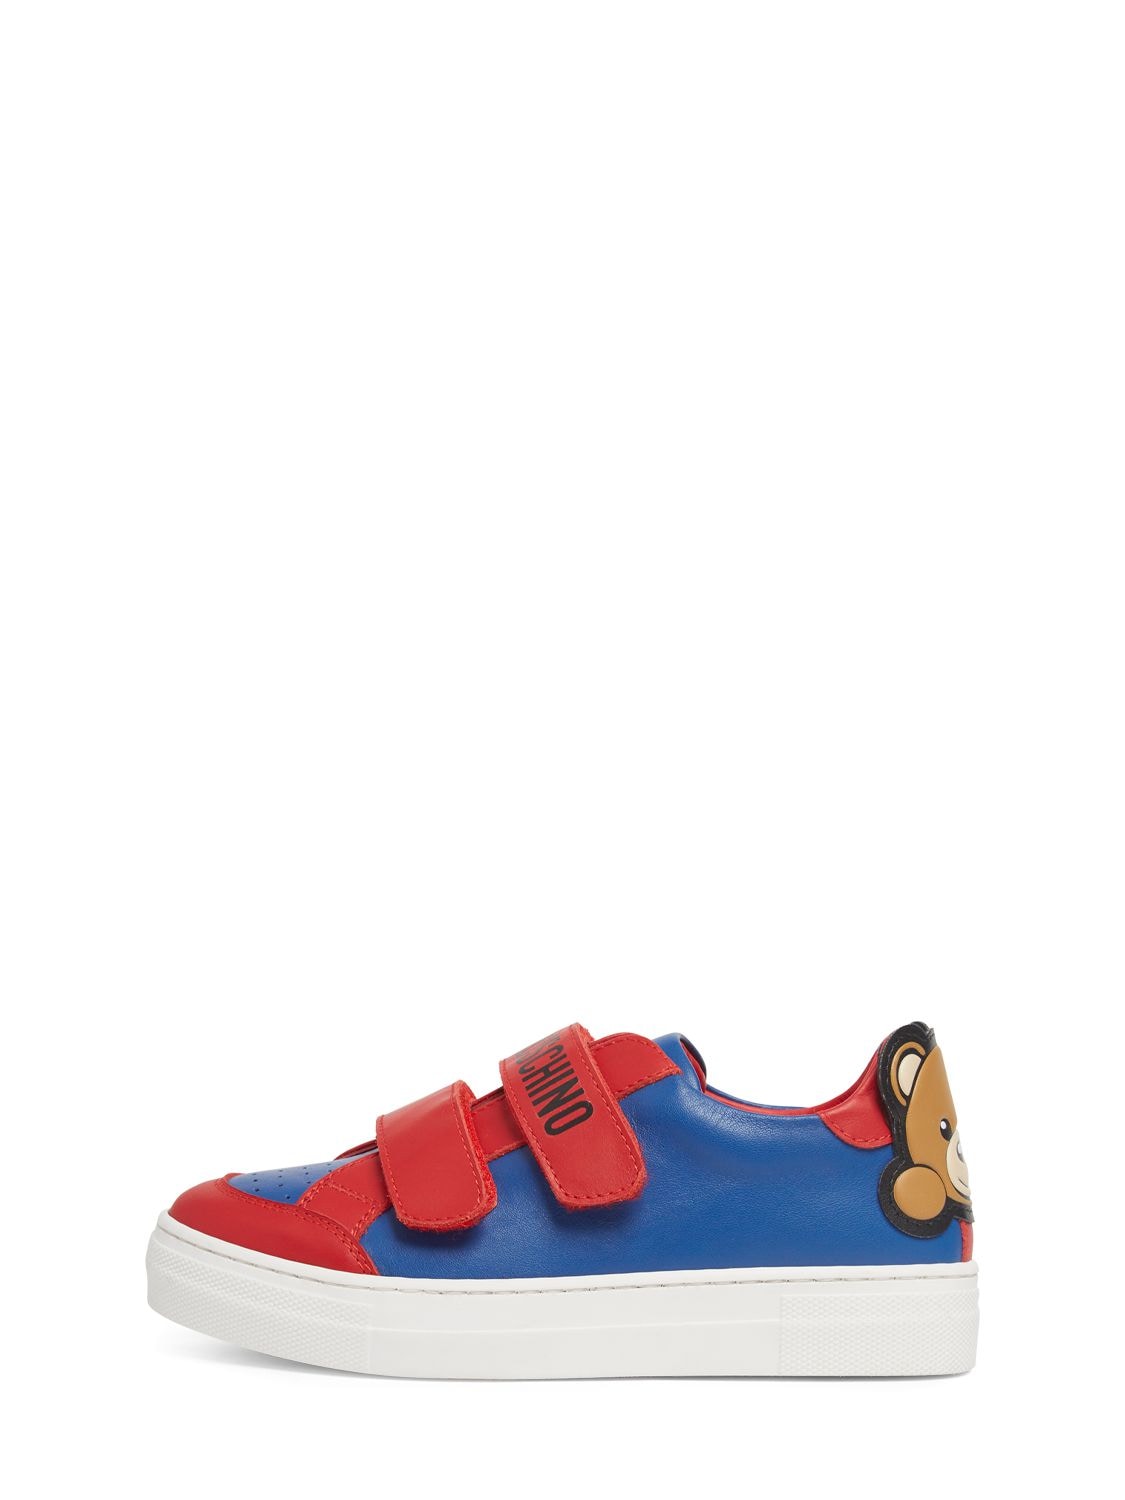 Moschino Kids' Leather Strap Sneakers W/logo In Blue,red